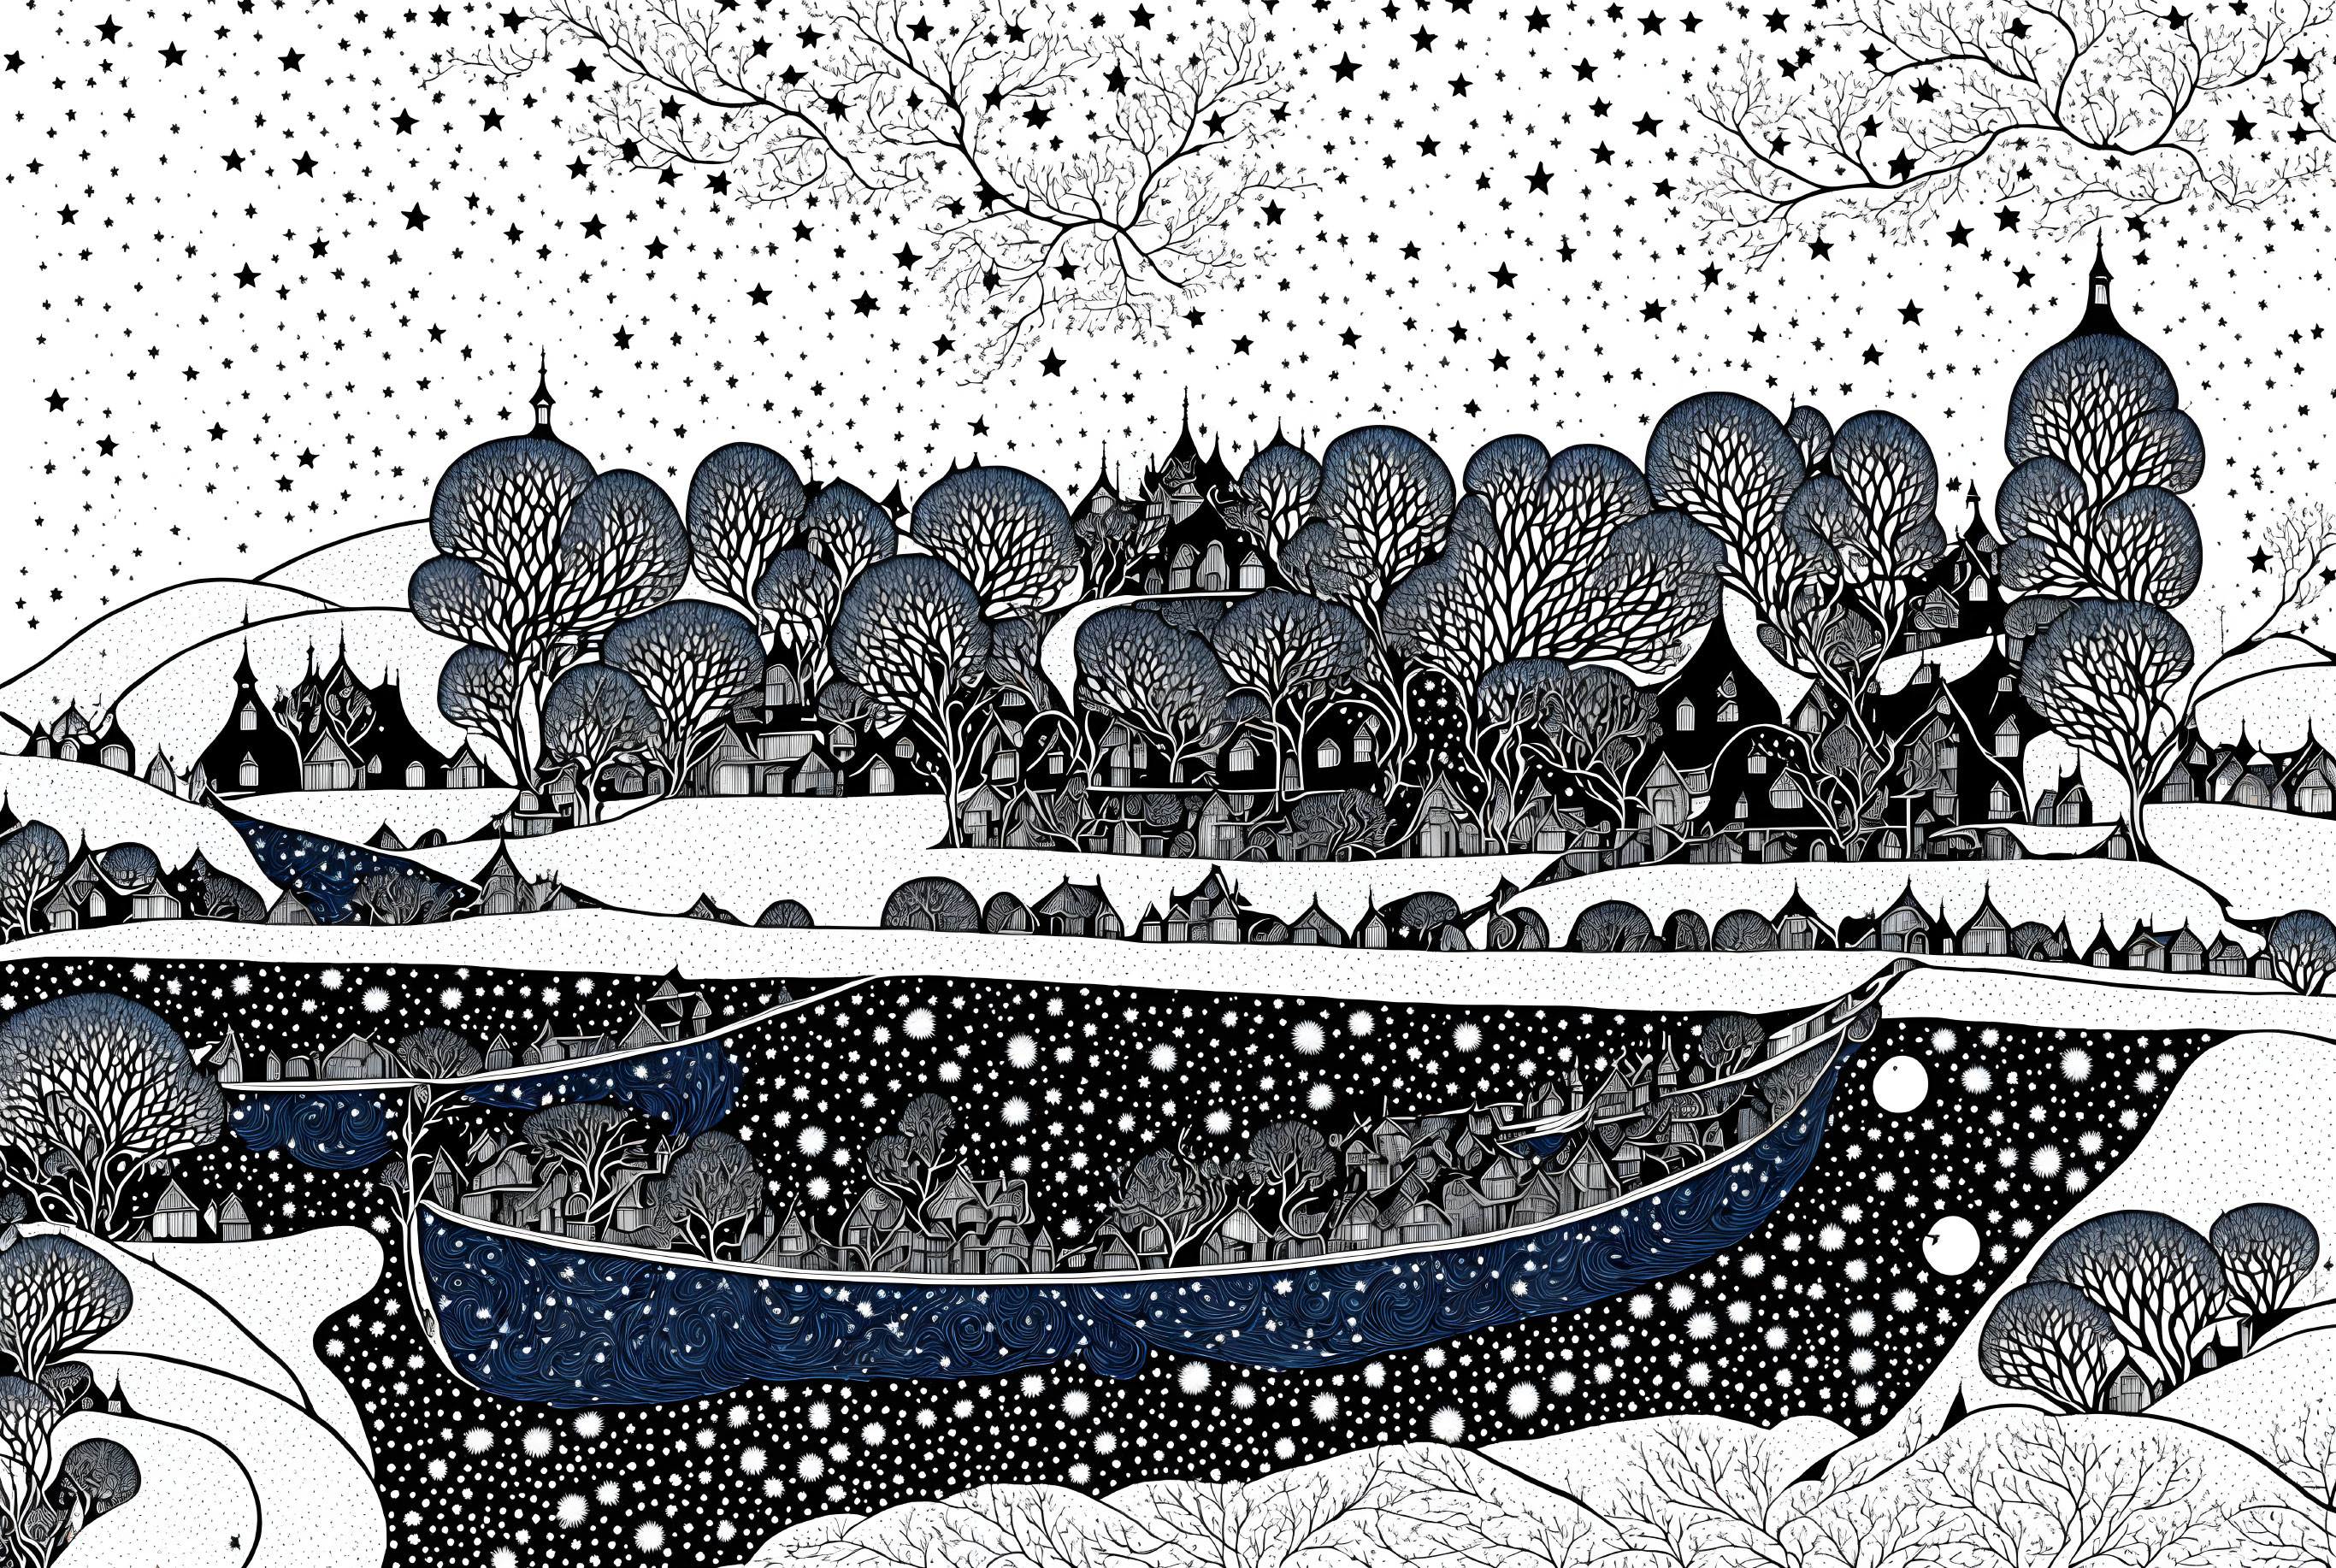 Detailed black and white snowy village illustration with starry sky, trees, houses, and river boat